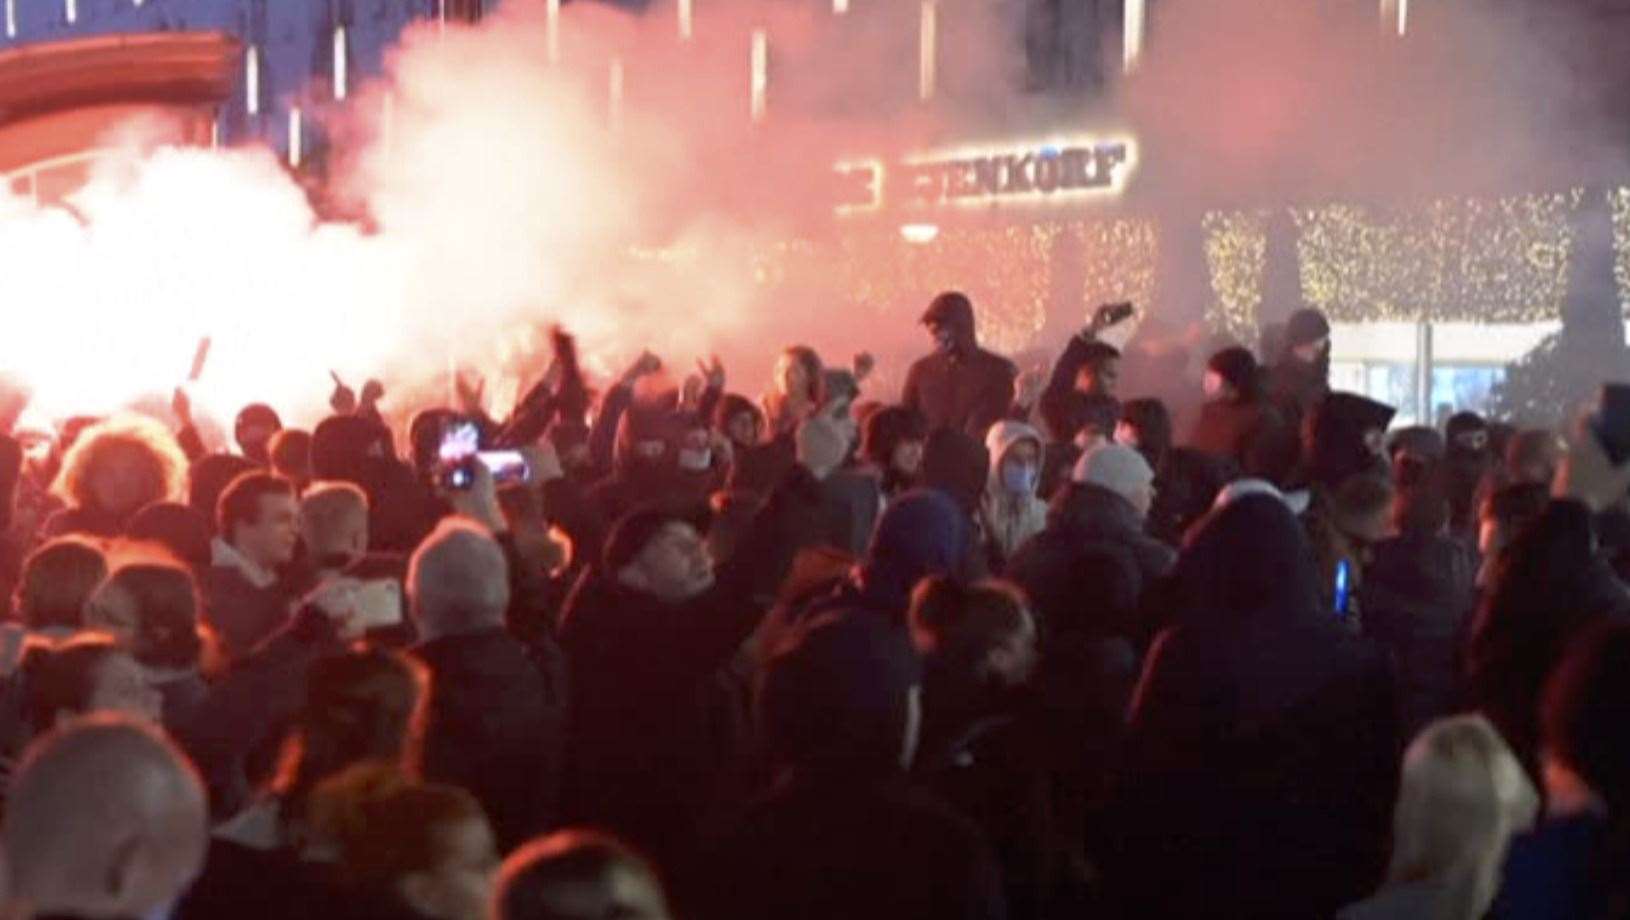 Police fired warning shots as riots broke out on Friday night in downtown Rotterdam (Media TV Rotterdam via AP)